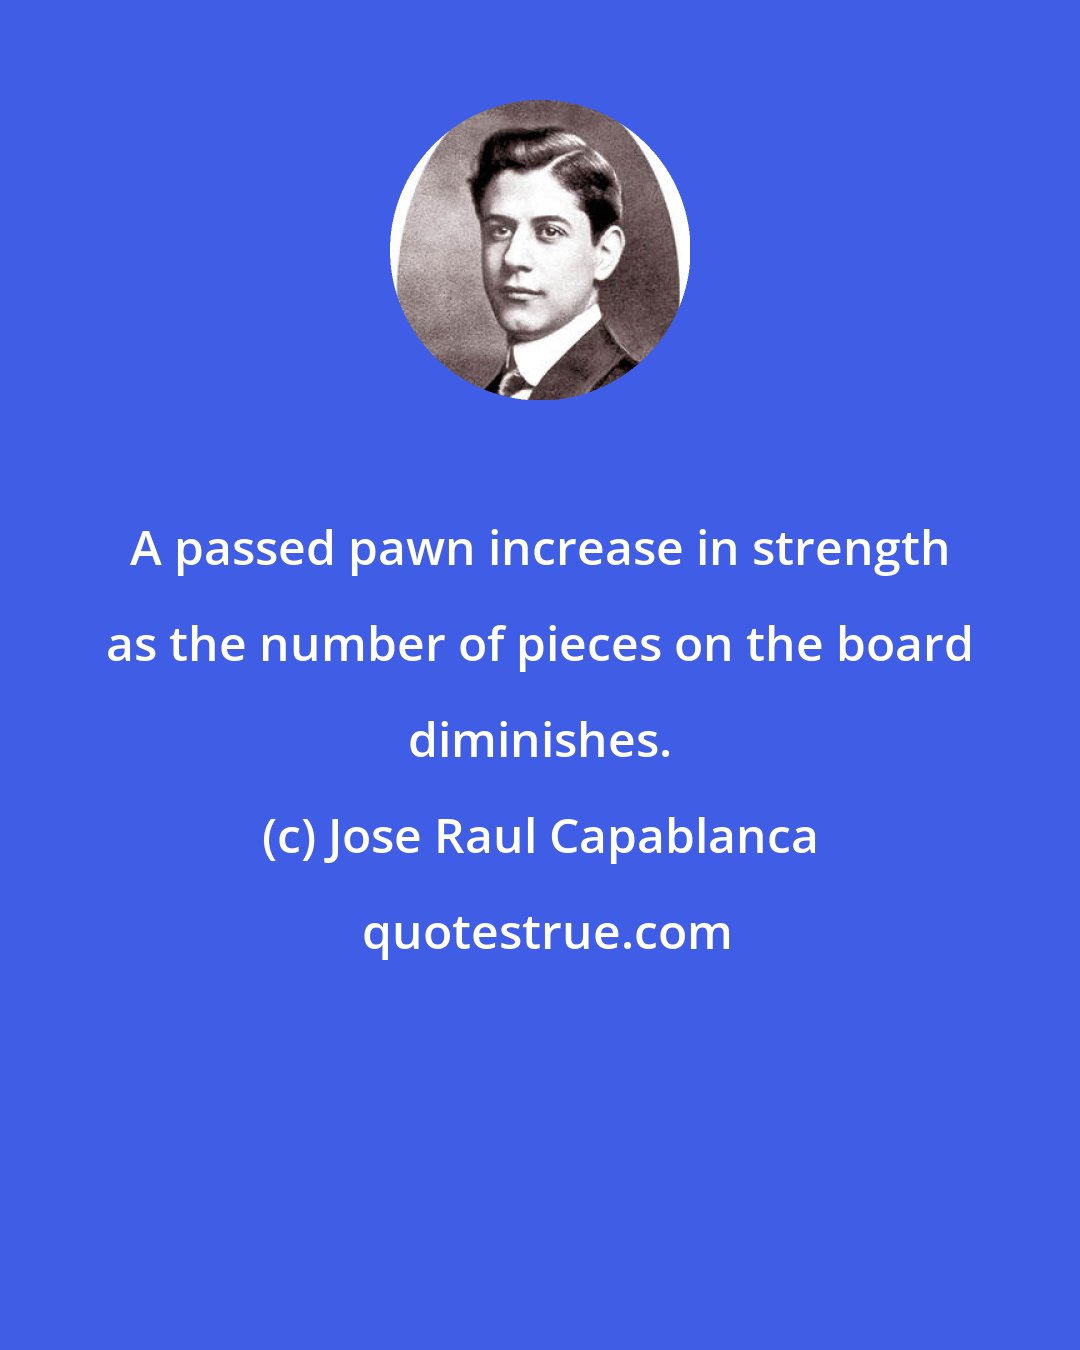 Jose Raul Capablanca: A passed pawn increase in strength as the number of pieces on the board diminishes.